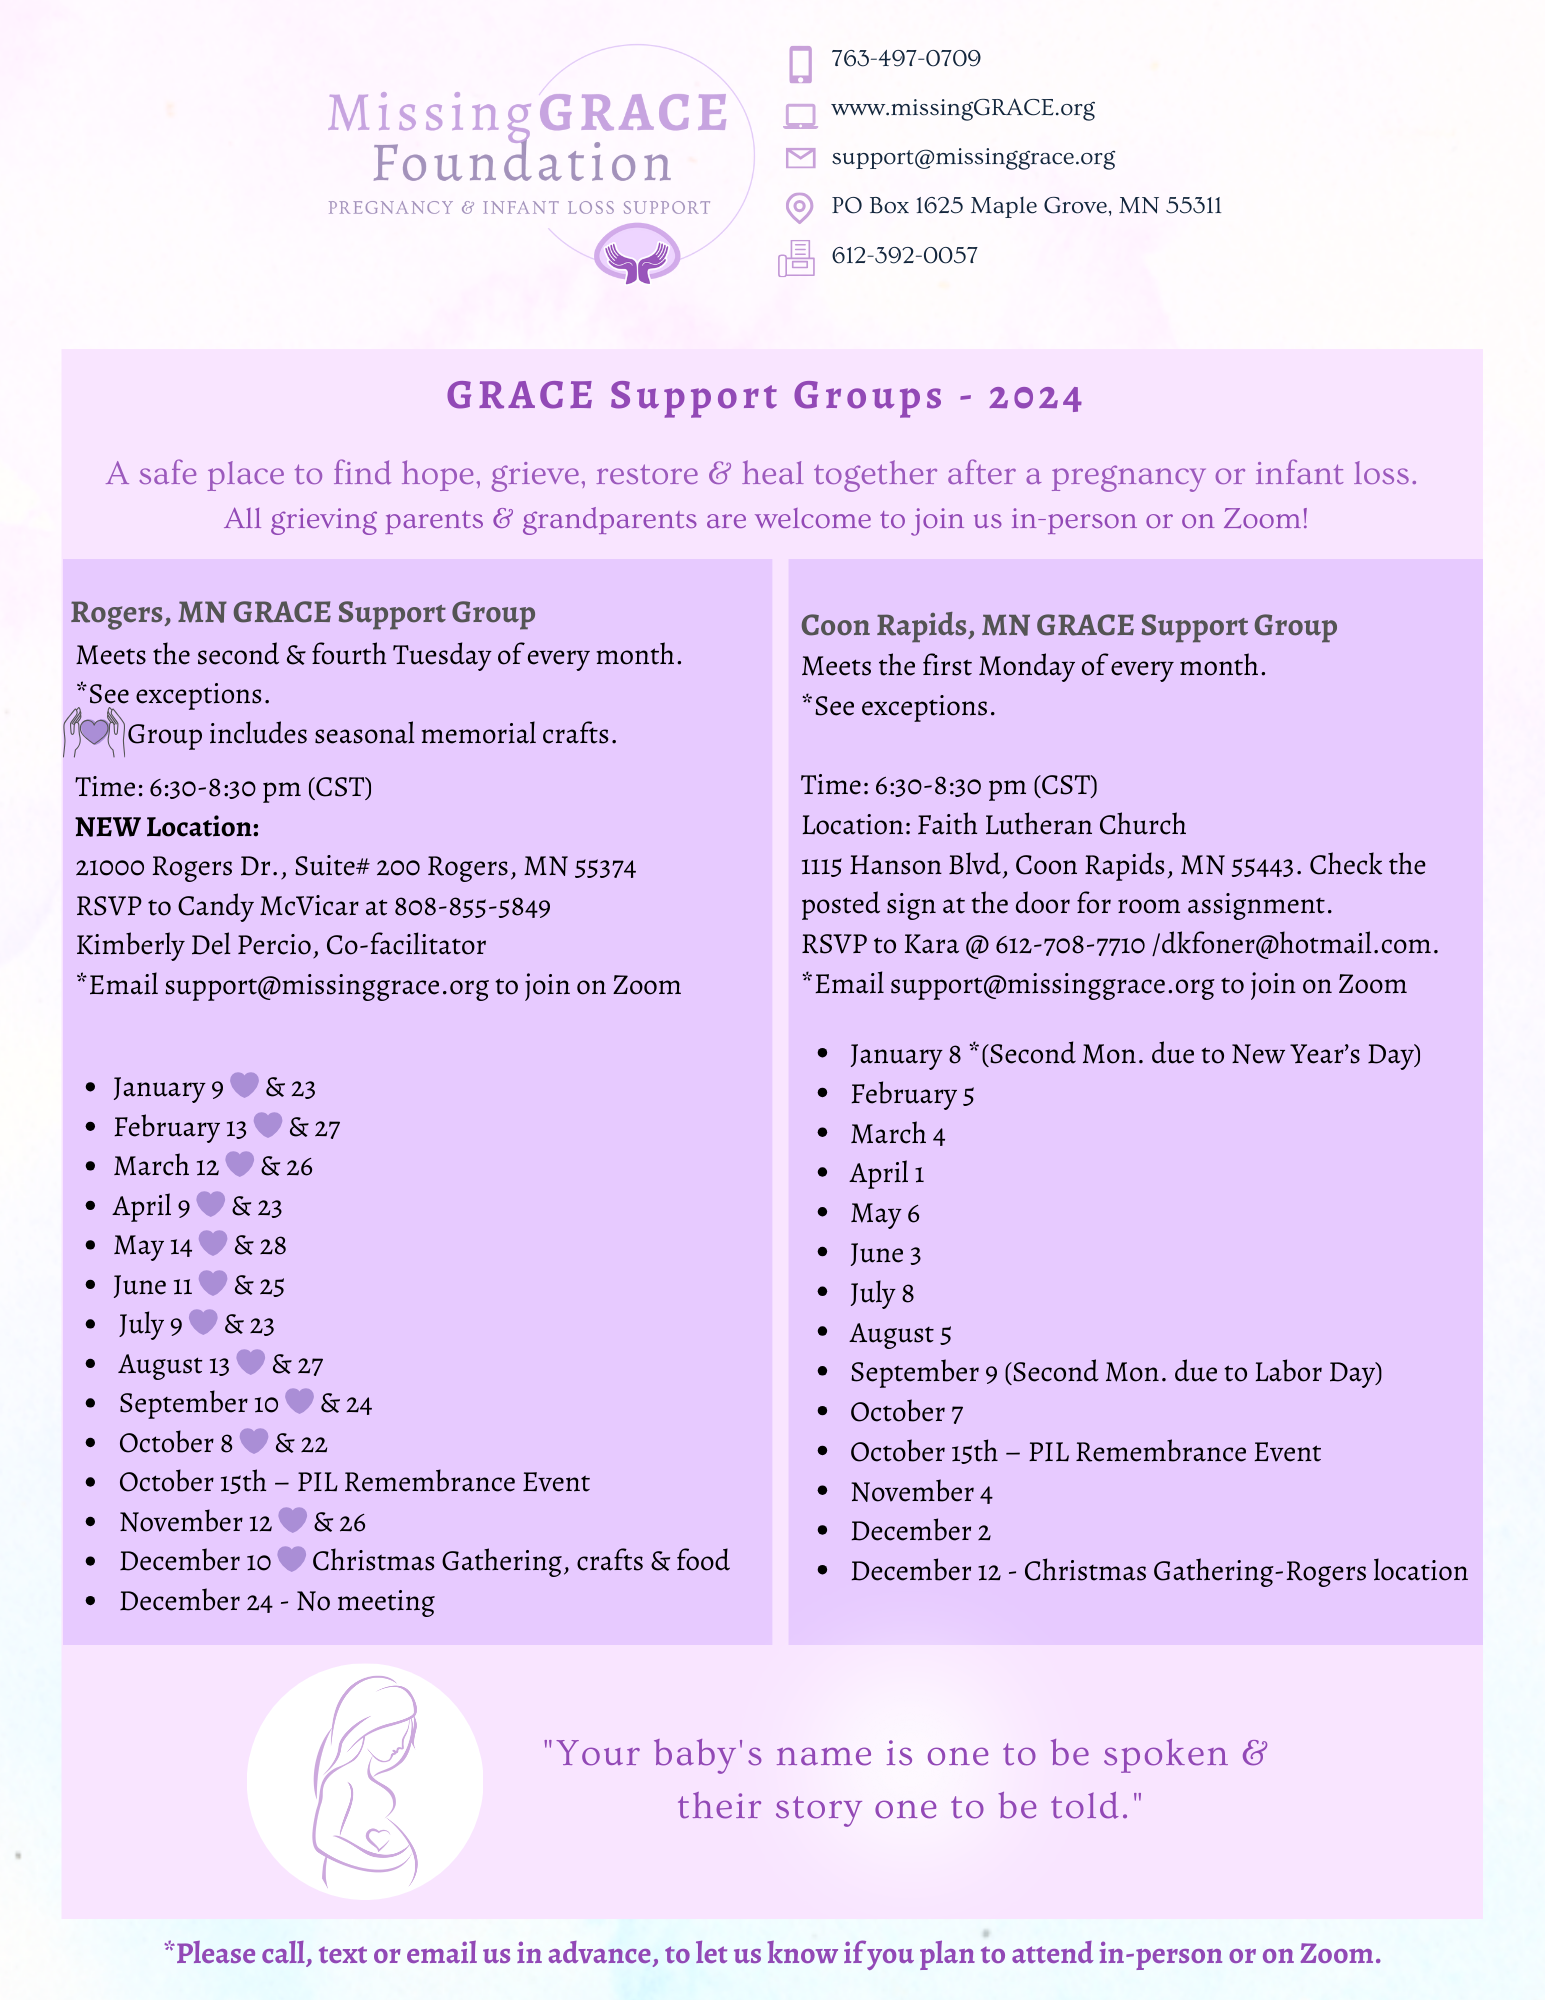 GRACE Support Groups 2024